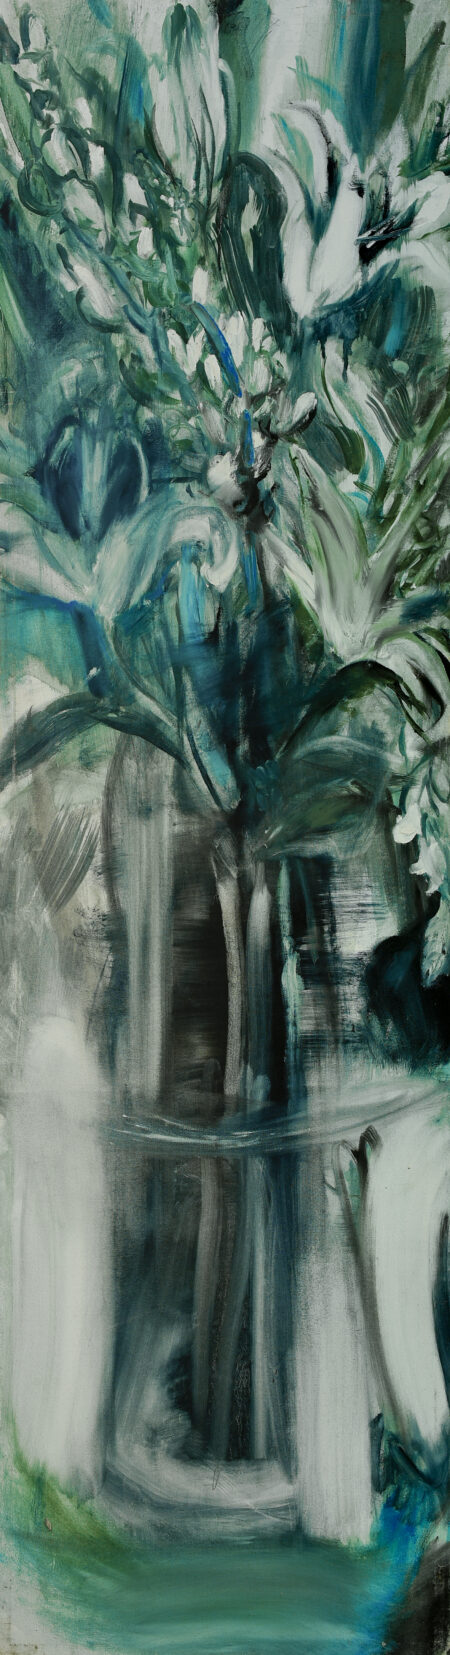 turquoise Lily painting by Olga Anaskina, featuring Lilies in a vase painted in an impressionist style with a colour pallet of turquoise and white.